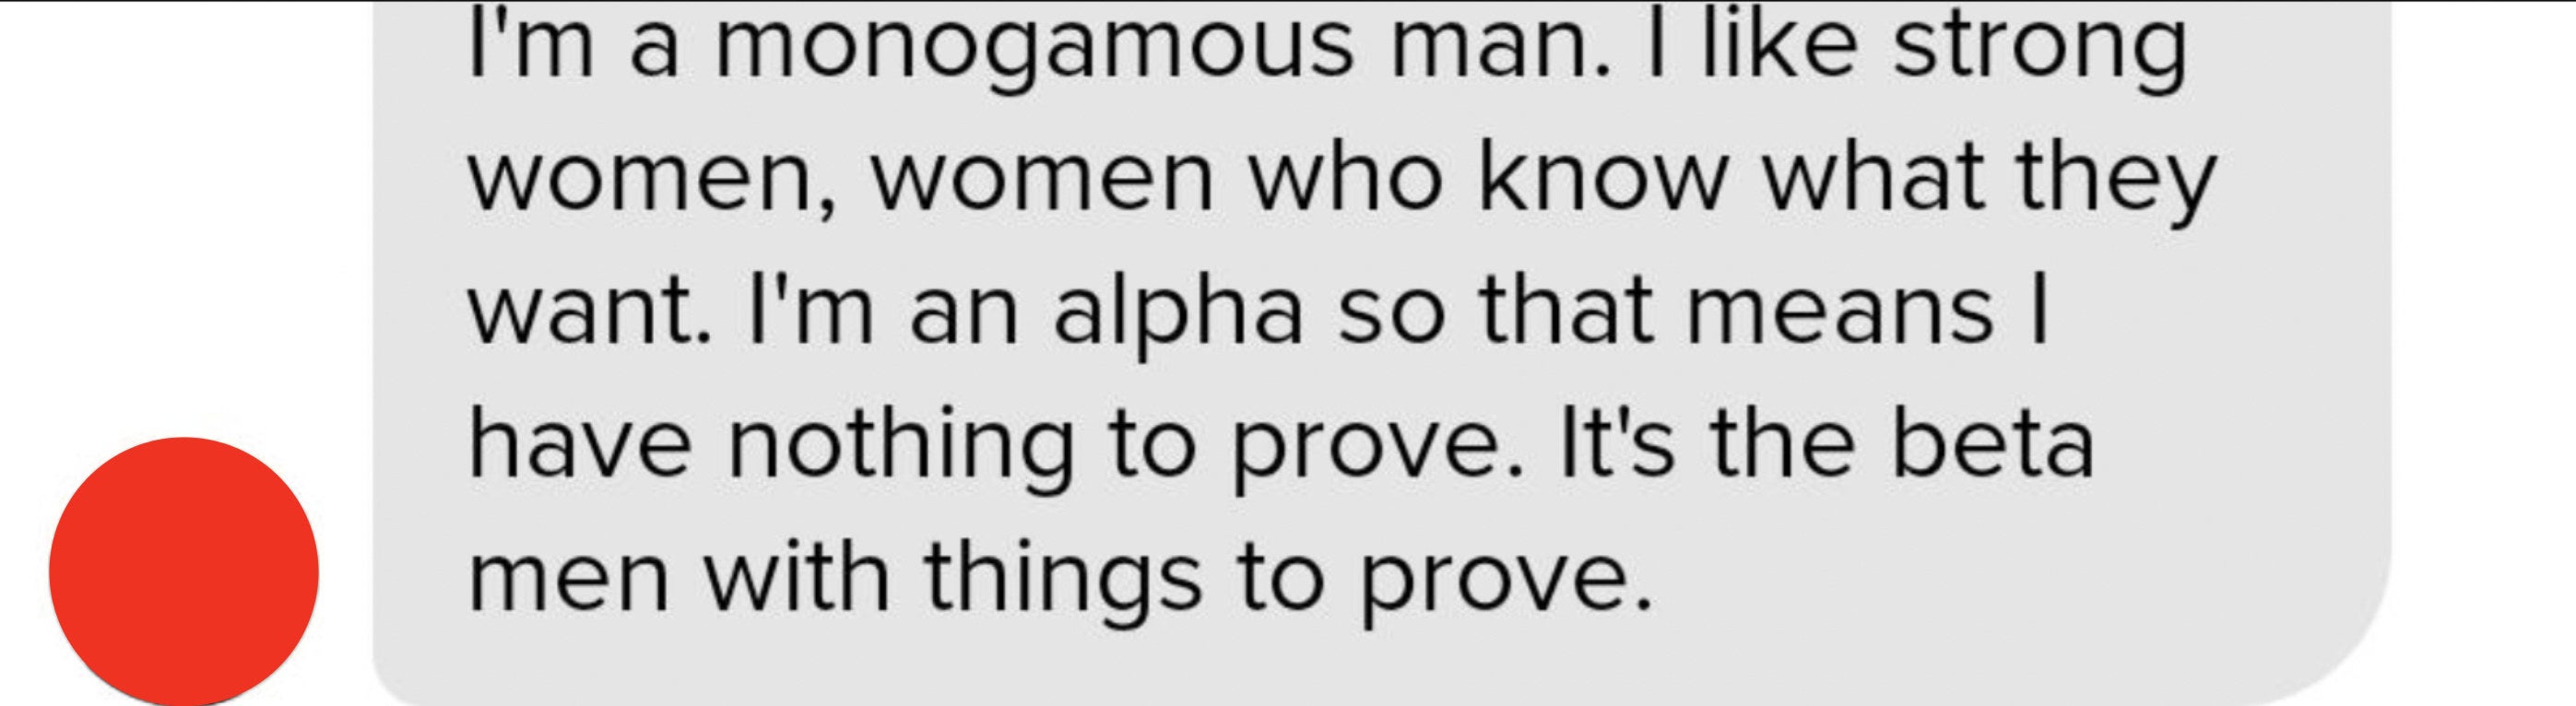 &quot;I&#x27;m a monogamous man. I like strong women, women who know what they want. I&#x27;m an alpha so that means I have nothing to prove. It&#x27;s the beta men with things to prove.&quot;